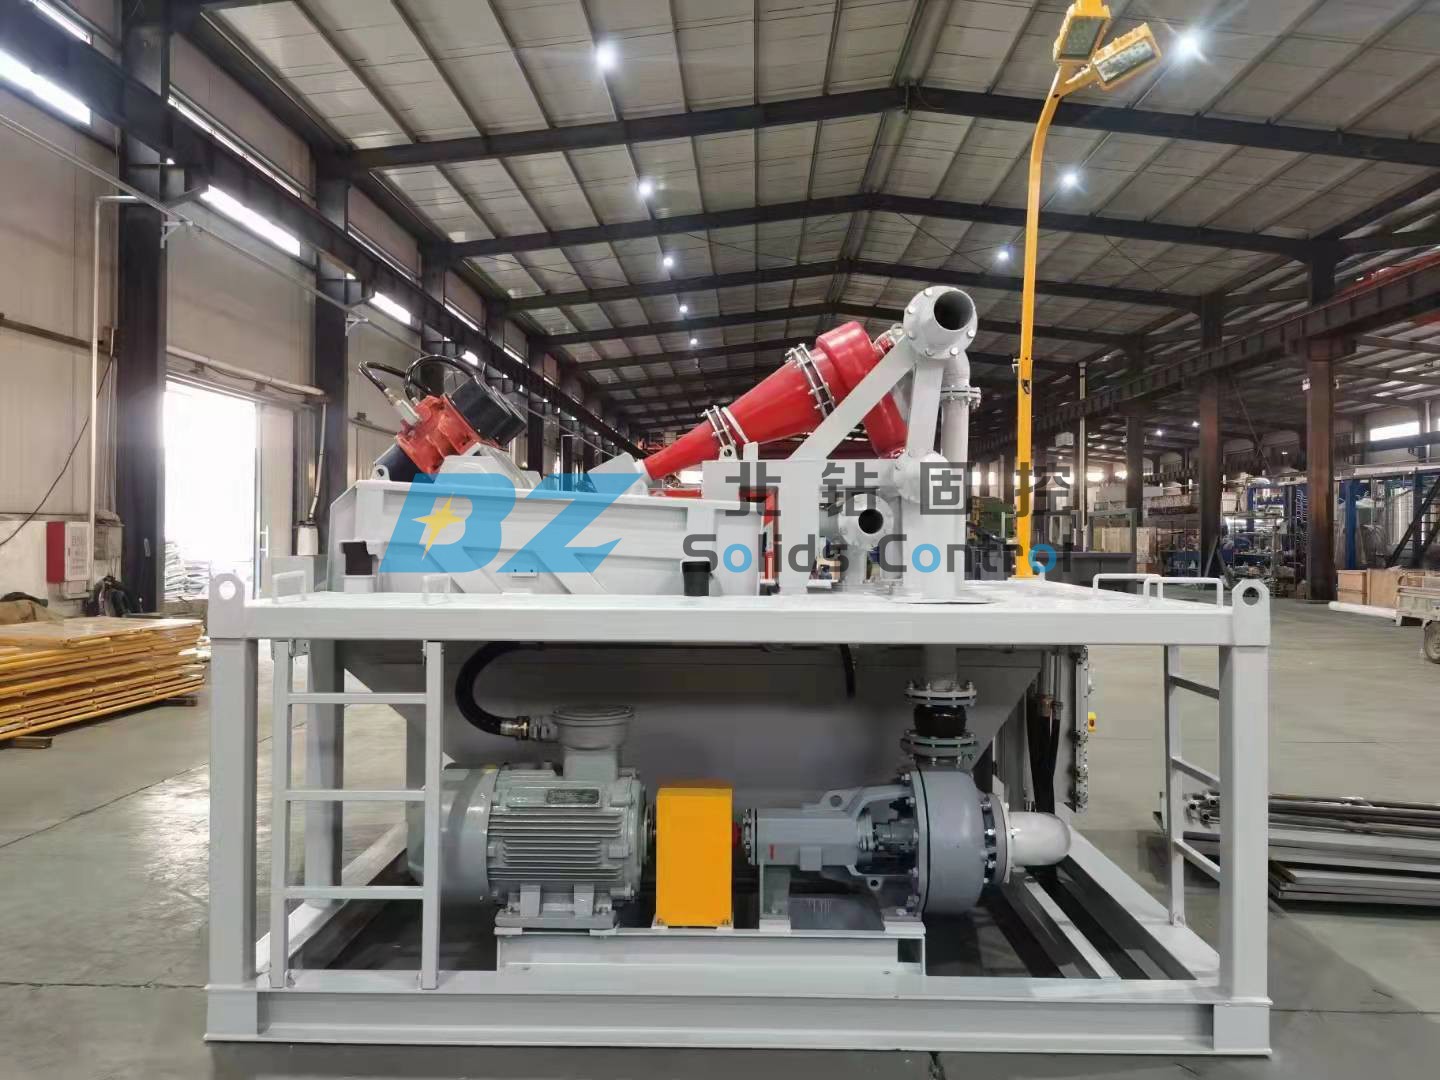 BZ  mud recycling system is sent to project site in China